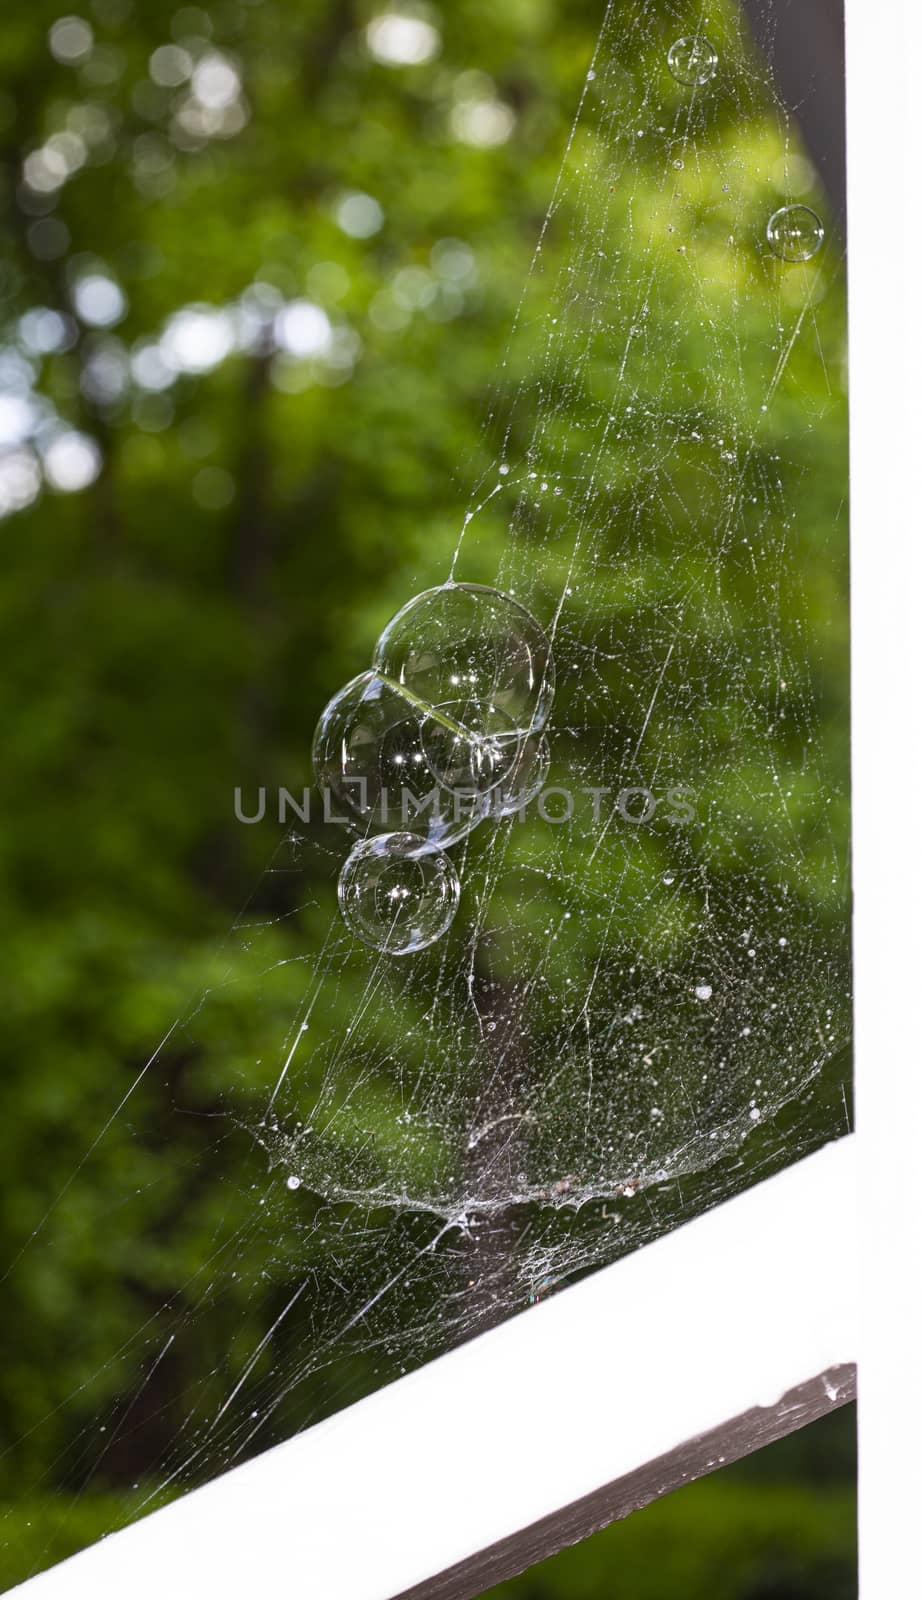 Bubbles Trapped in Web by CharlieFloyd